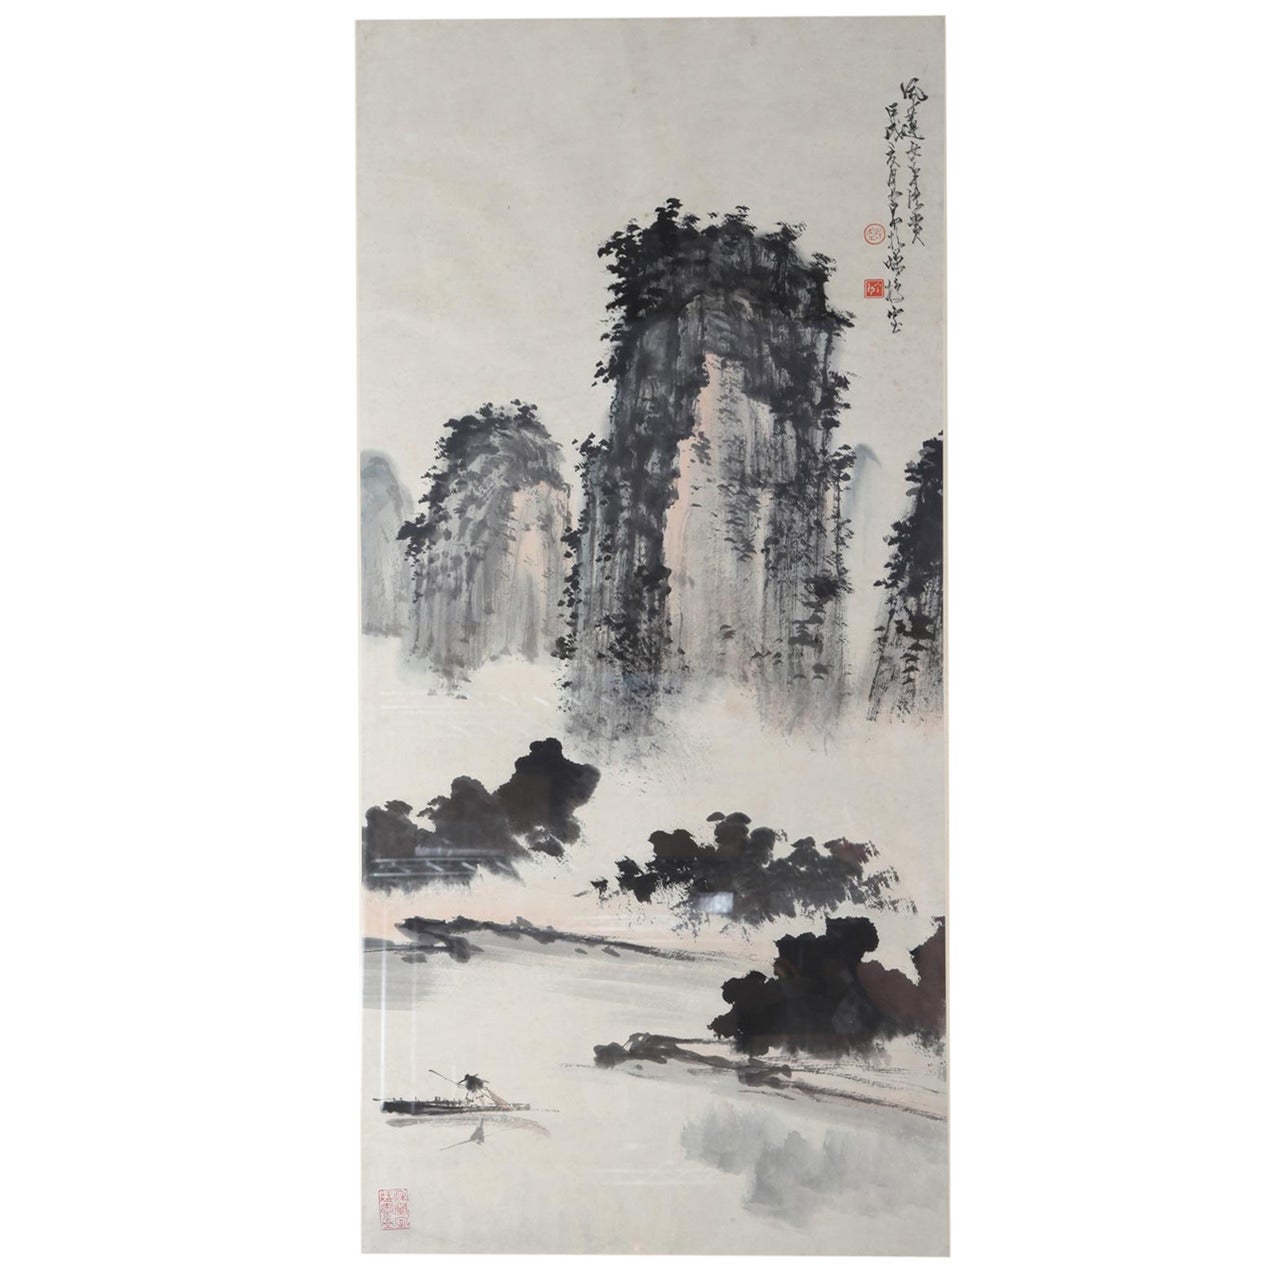 Chinese Ink and Color on Paper Landscape Painting Attributed to Zhao Shao Ang